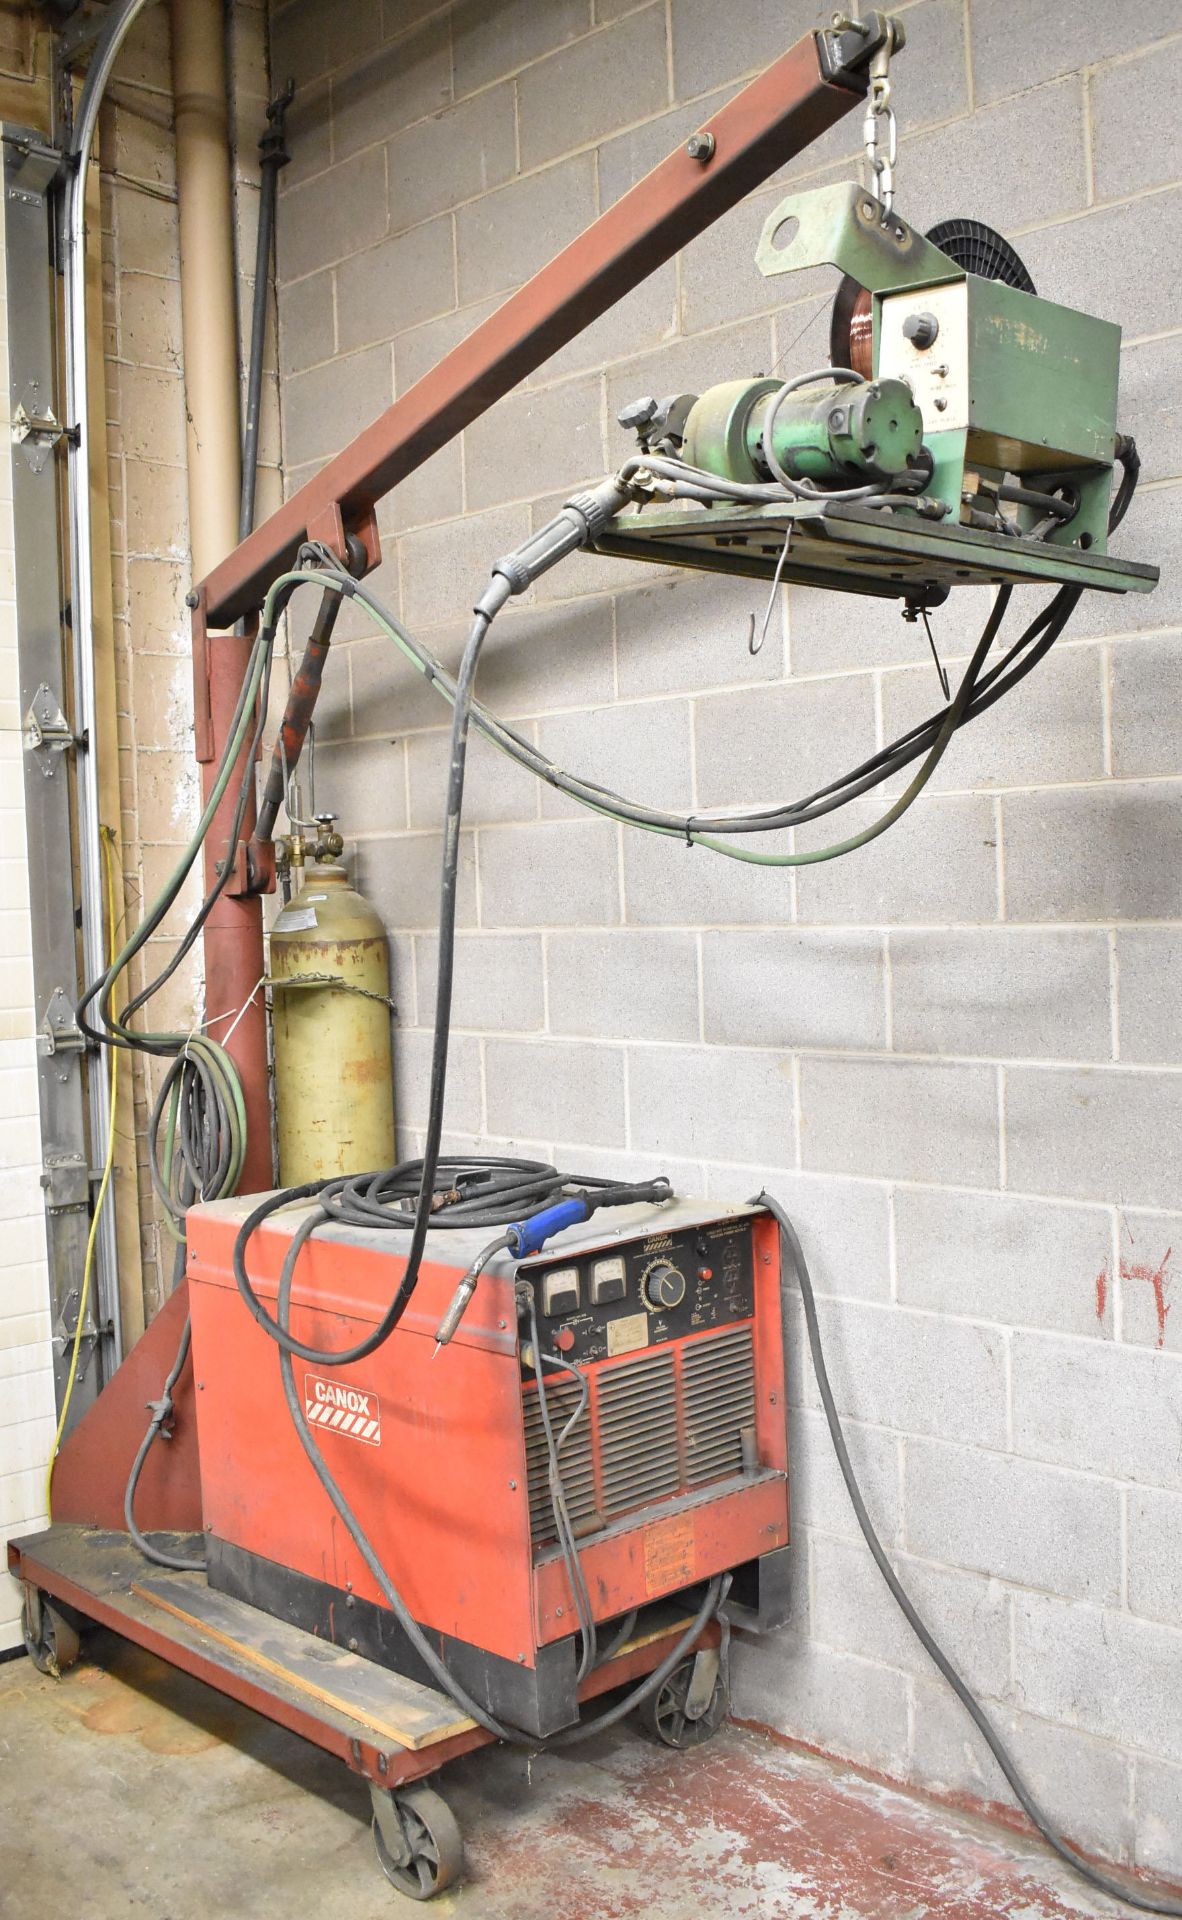 CANOX C-DW-450 MIG WELDER WITH WIRE FEEDER, BOOM, CABLES & GUN, S/N: JG056723 (TANK NOT INCLUDED)